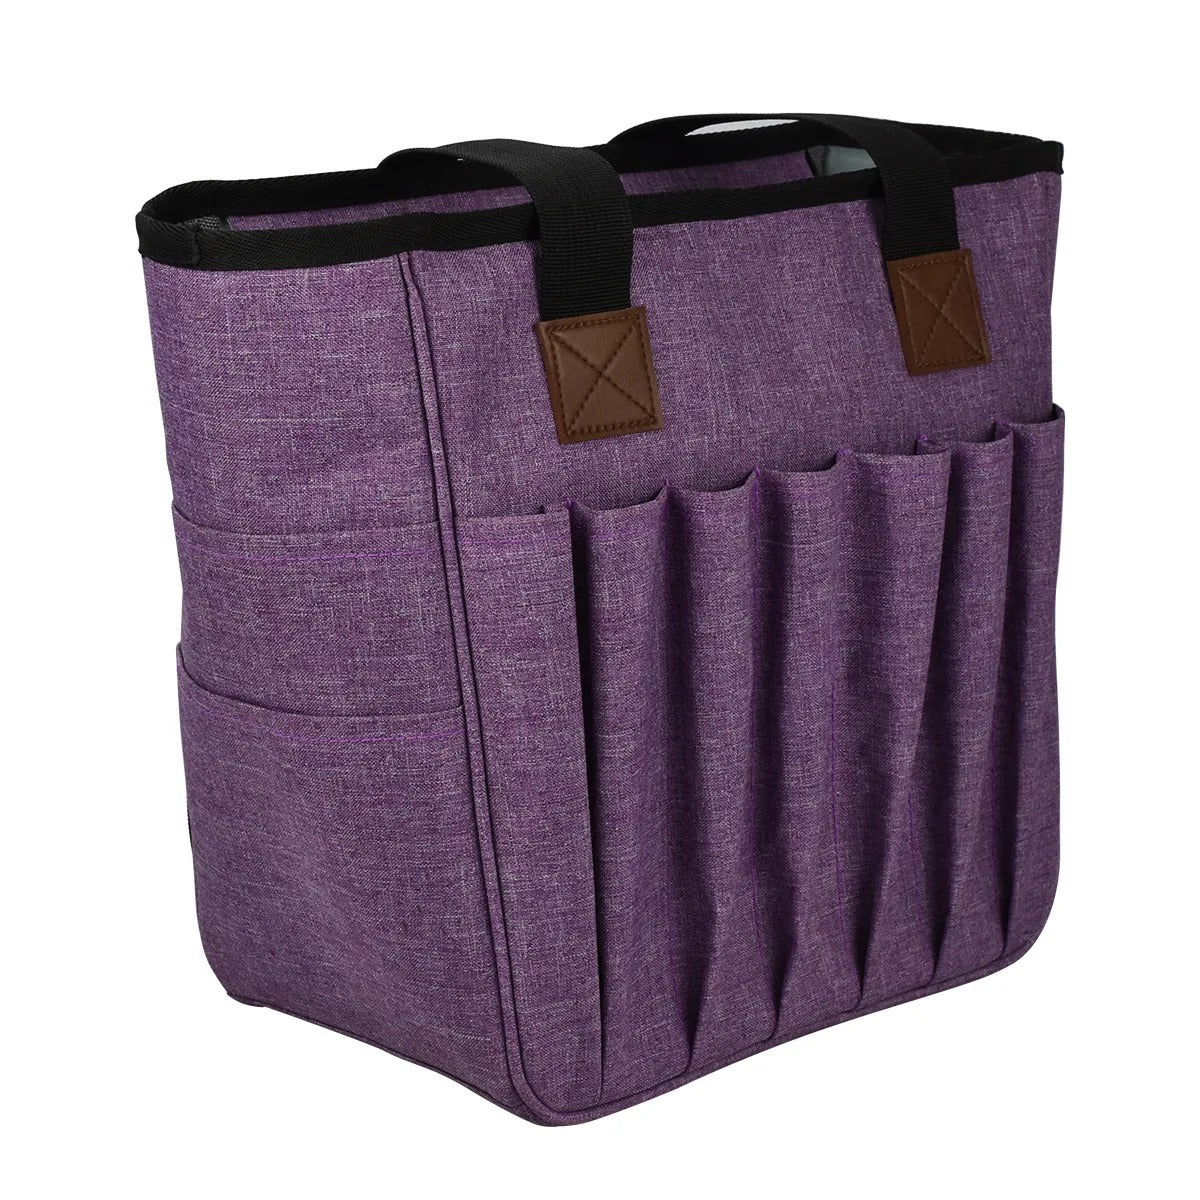 Purple Yarn Organizer Tote, perfect as a Craft Organizer, with multiple exterior pockets and black handles.